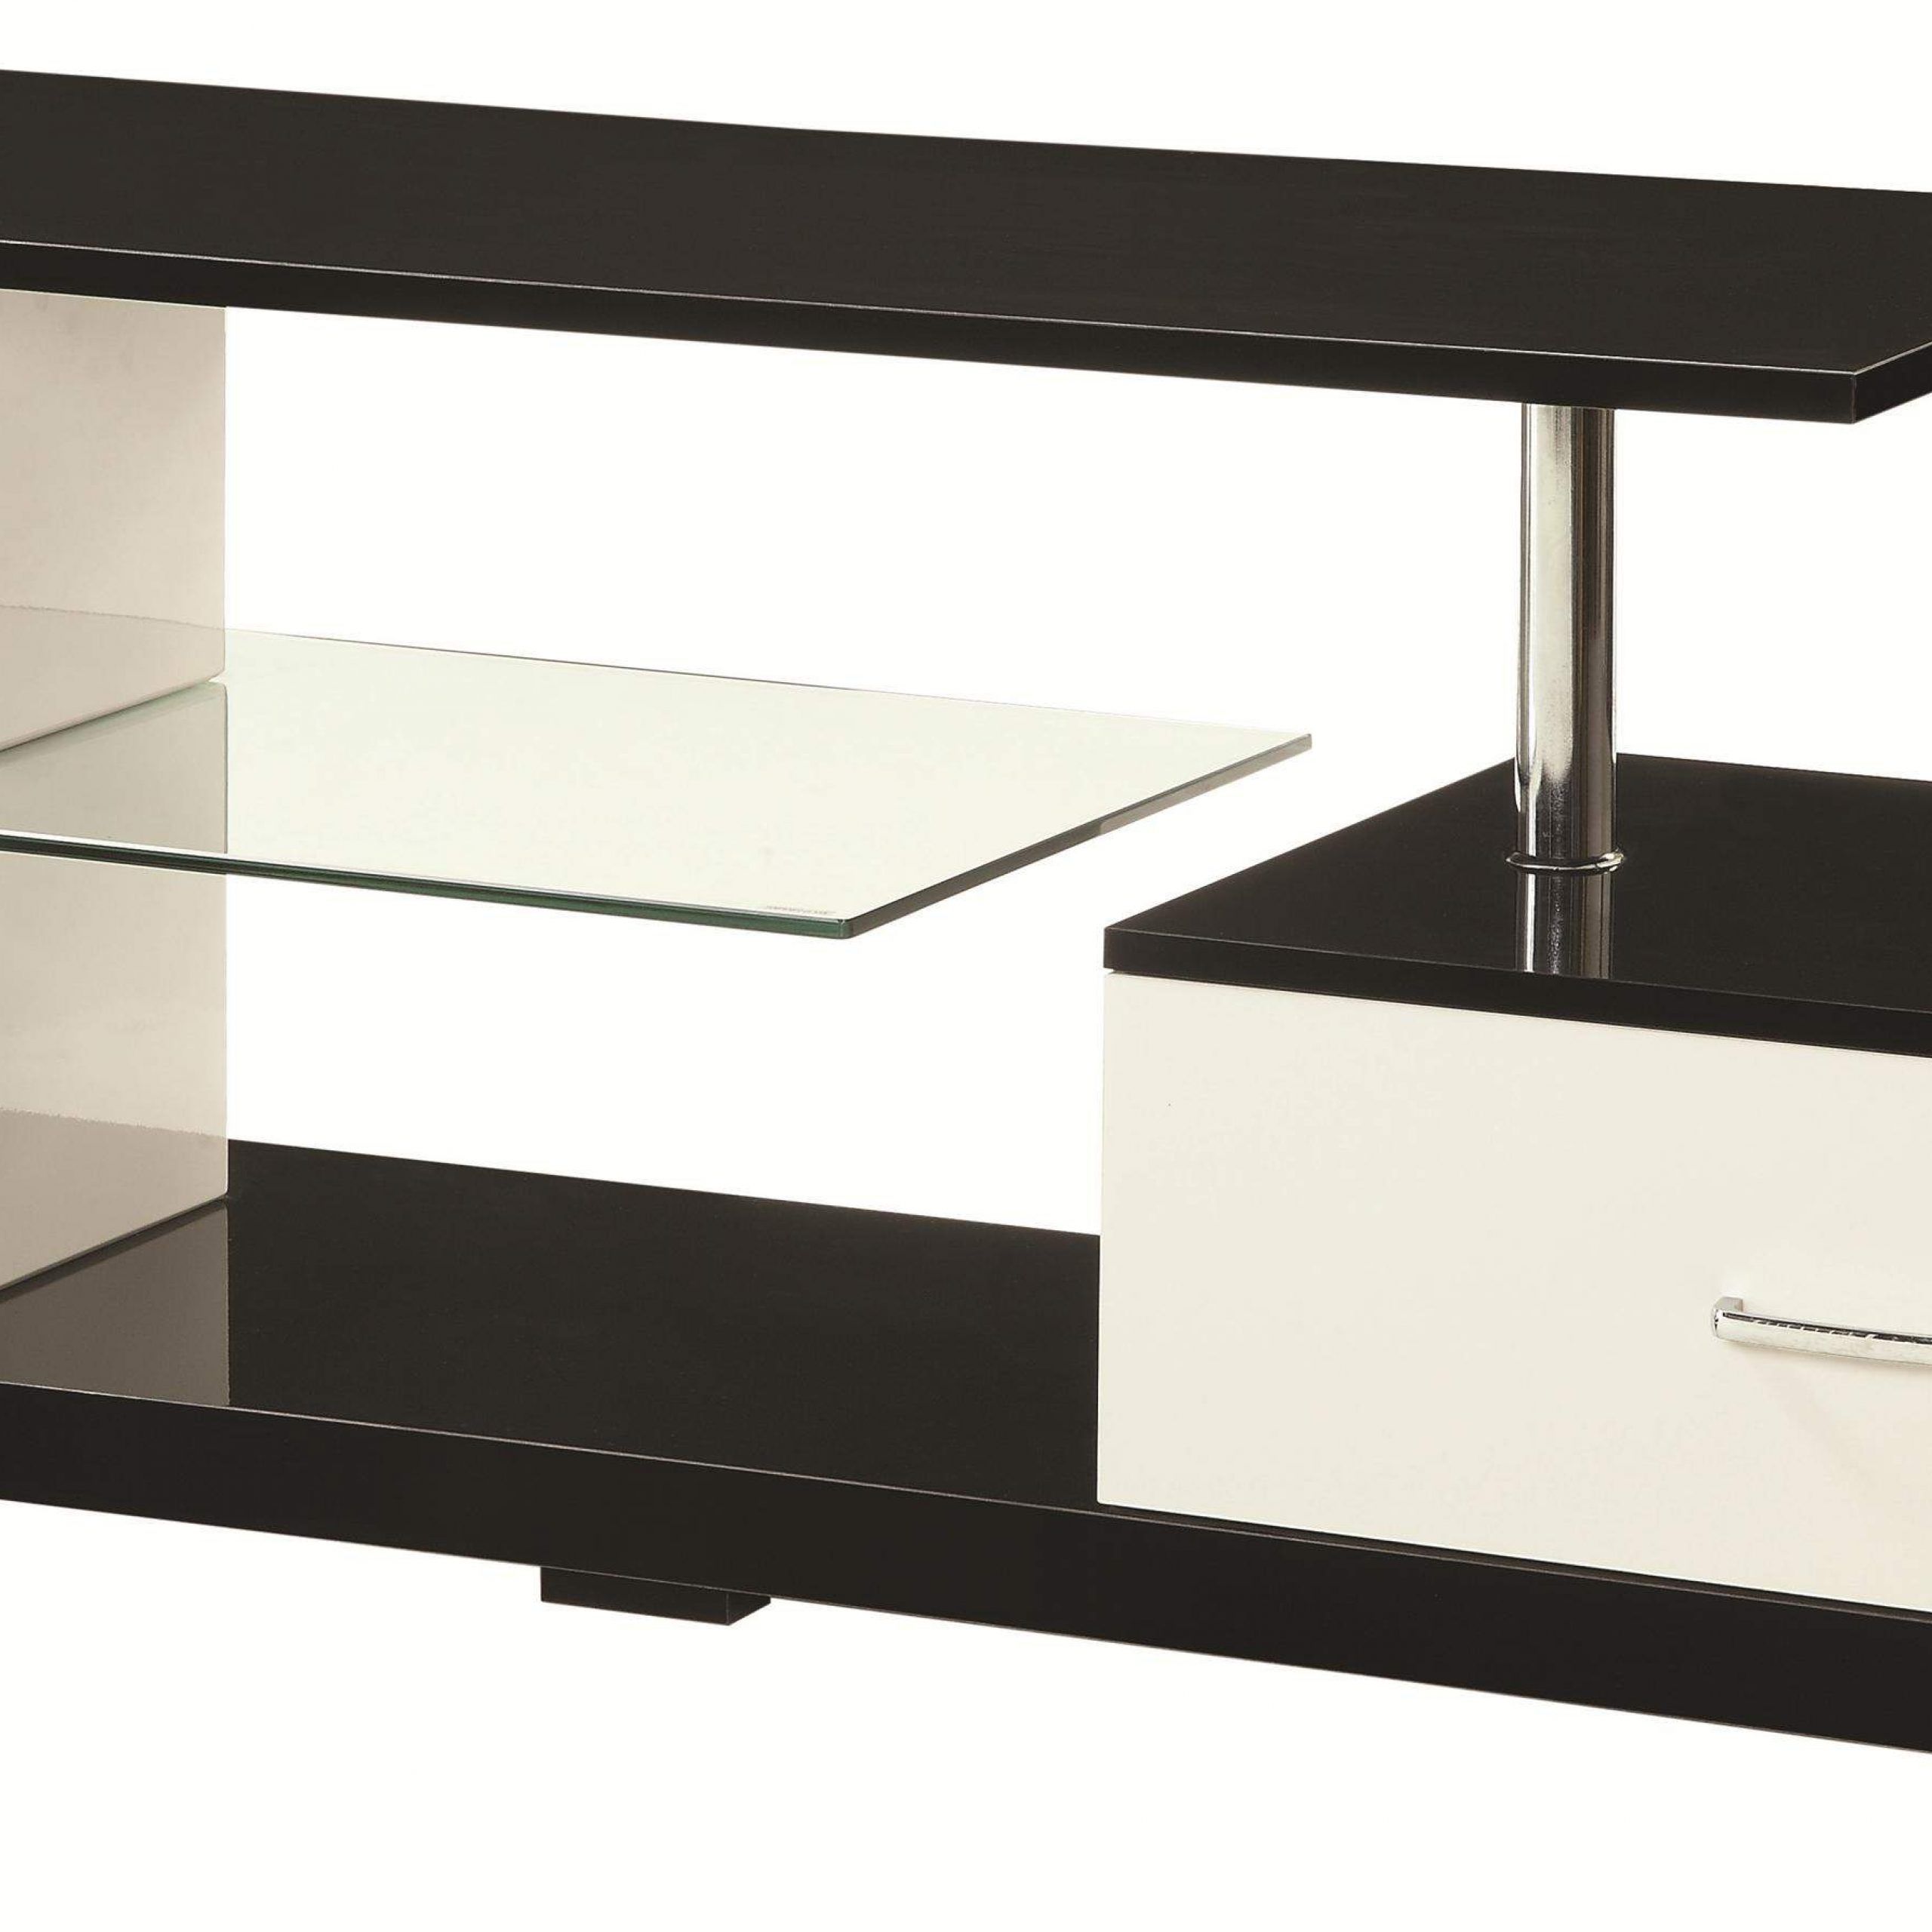 Rfiver Black Tabletop Tv Stands Glass Base In Well Known Tv Stands Black, Silver And White Tv Stand With Drawer And (View 2 of 10)